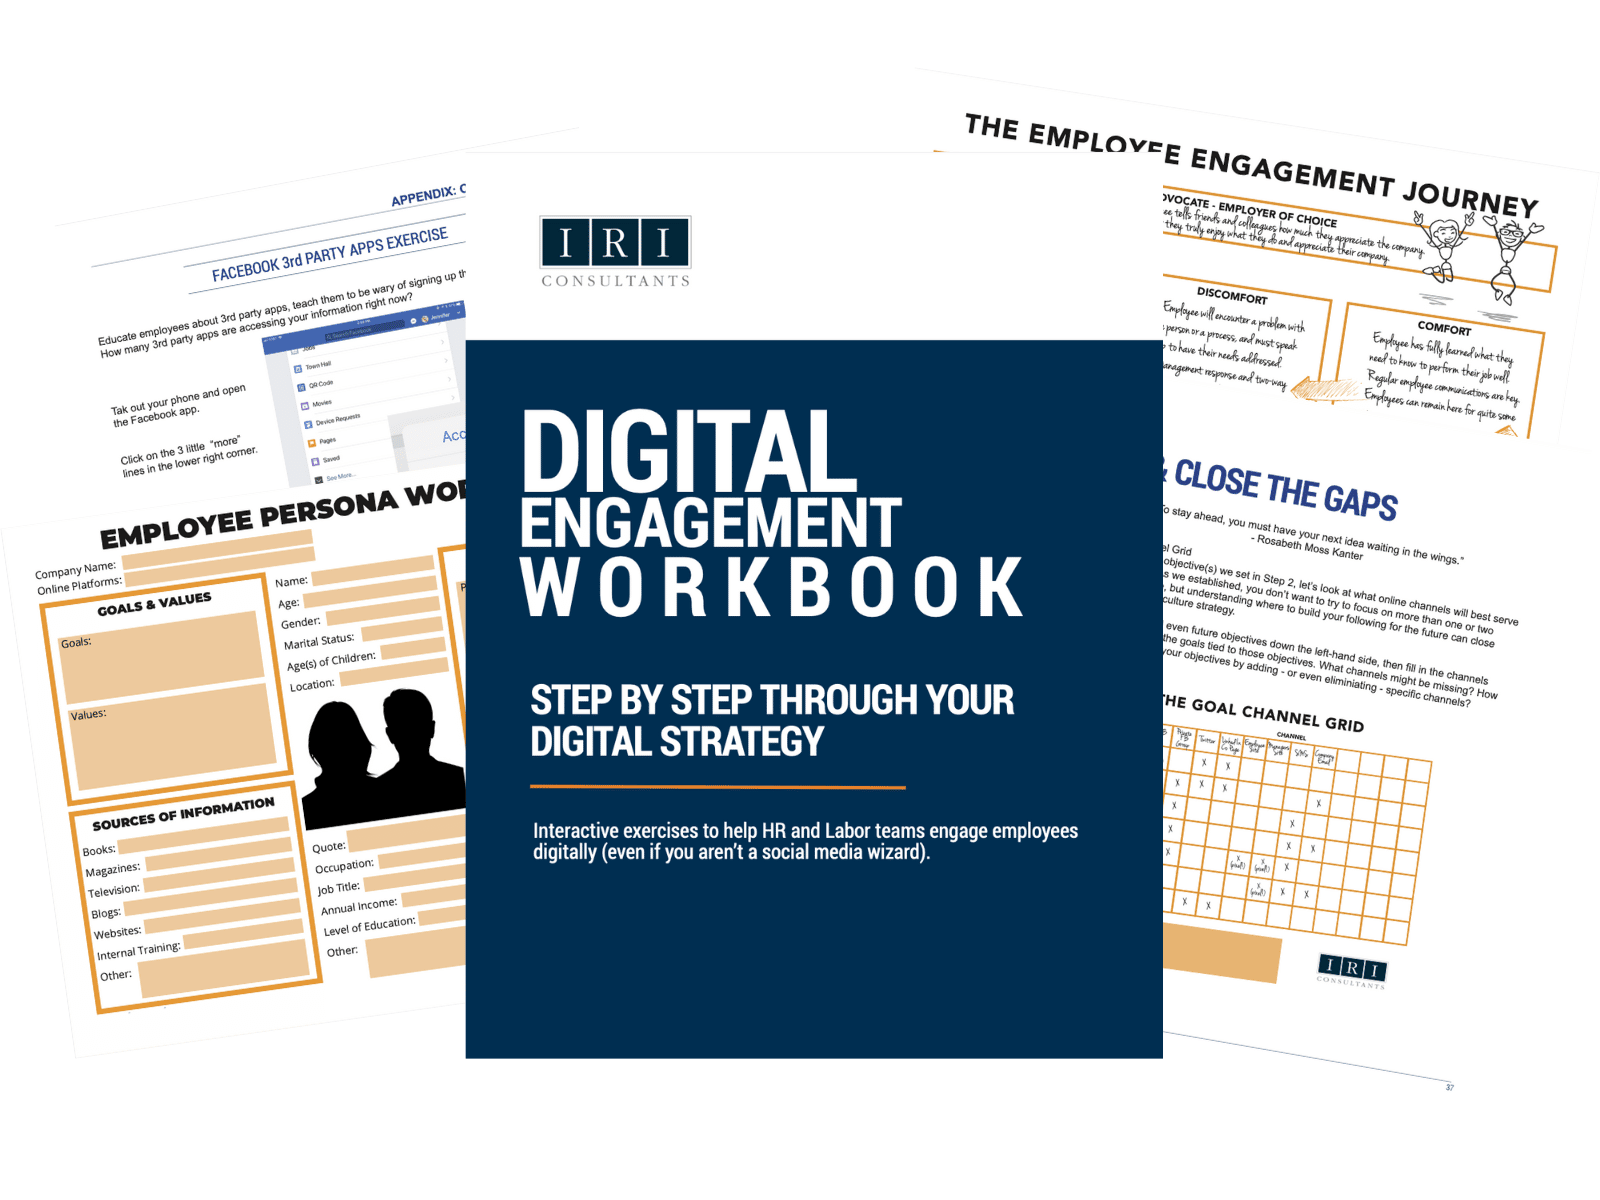 Workbook for Digital Communication With Employees